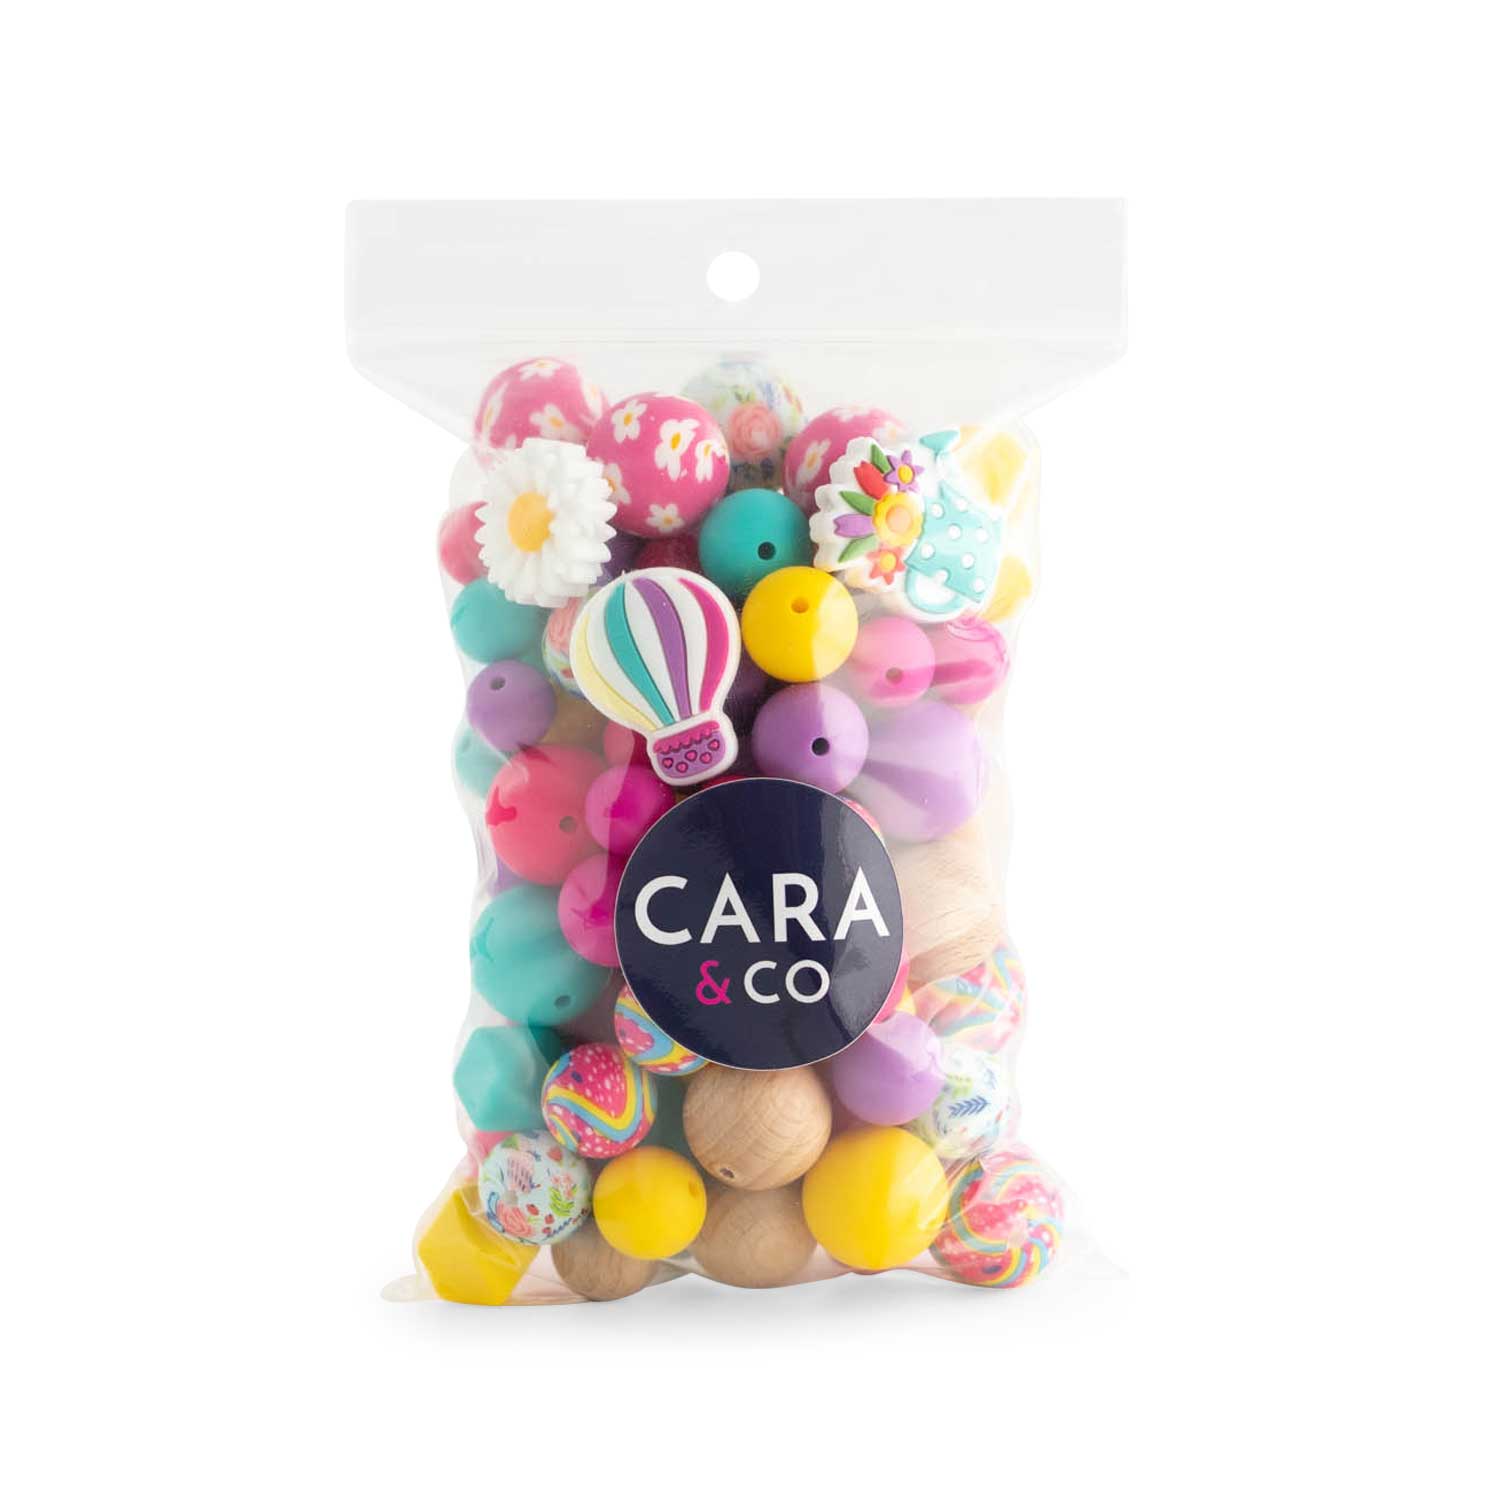 Silicone Bead Packs Daisy Floral Themed Silicone from Cara & Co Craft Supply